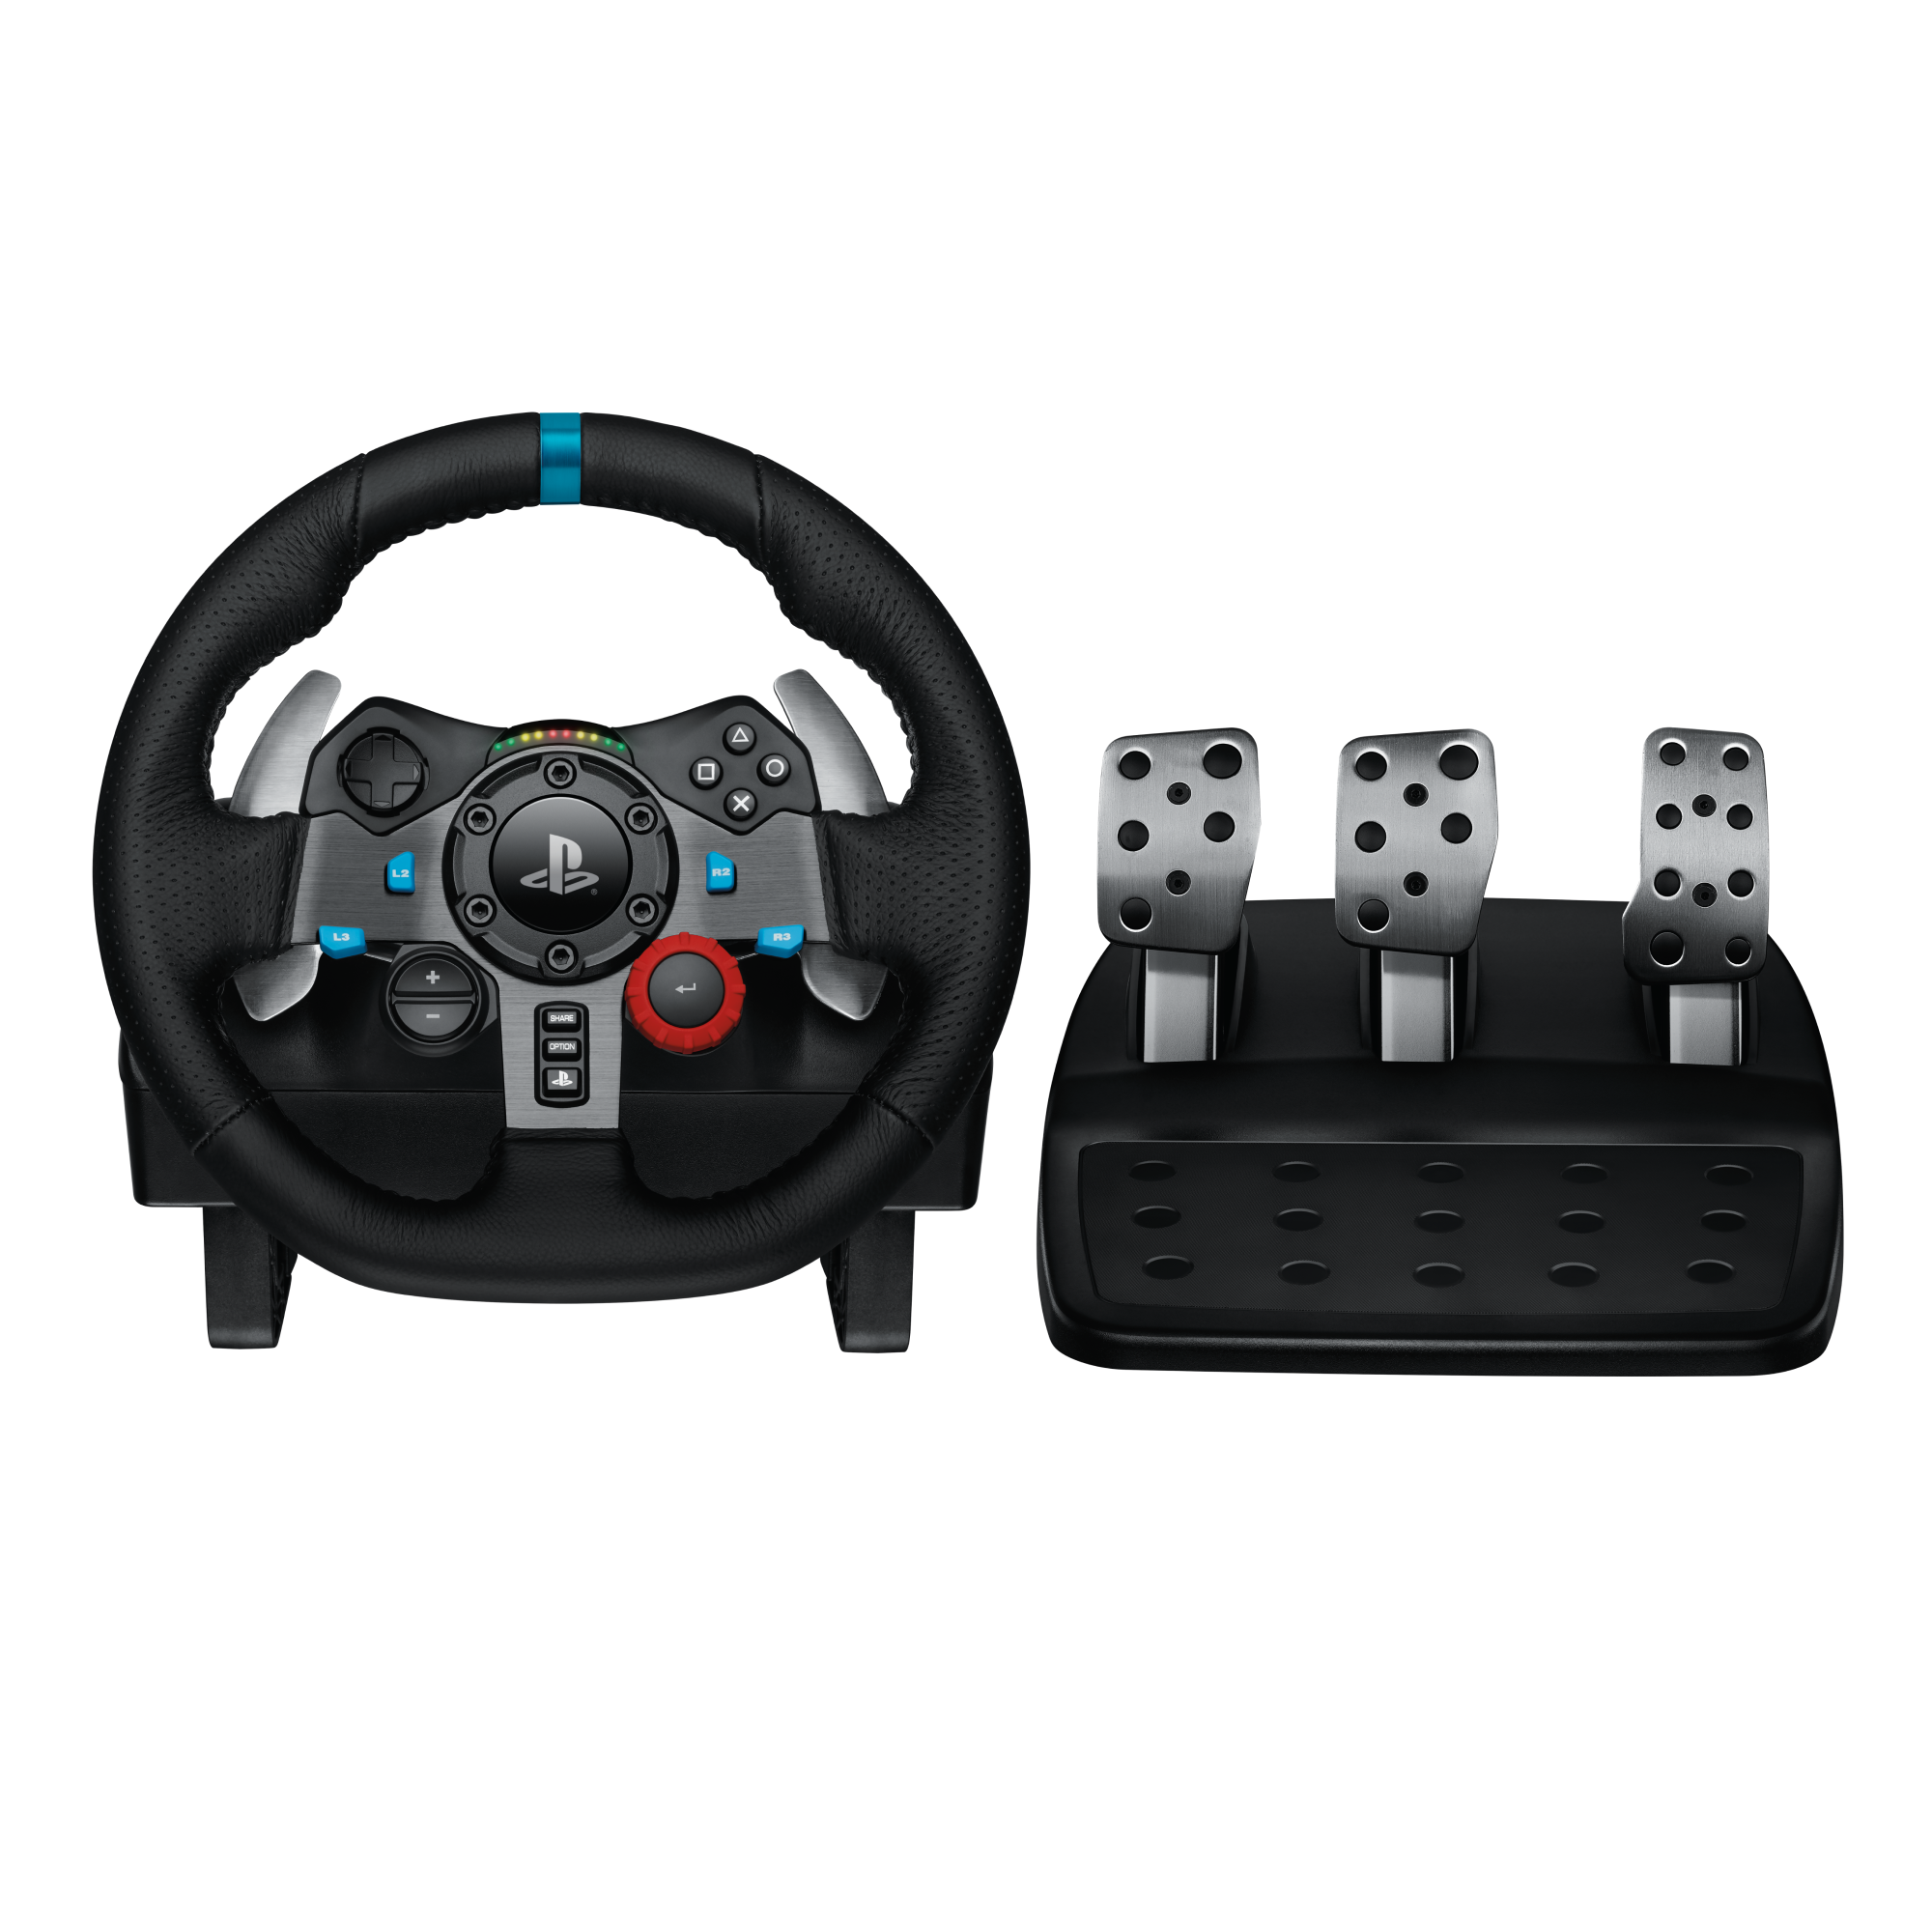 Escuela primaria Lima salado Logitech G29 Driving Force Racing Wheel for PlayStation 4, 5, and PC